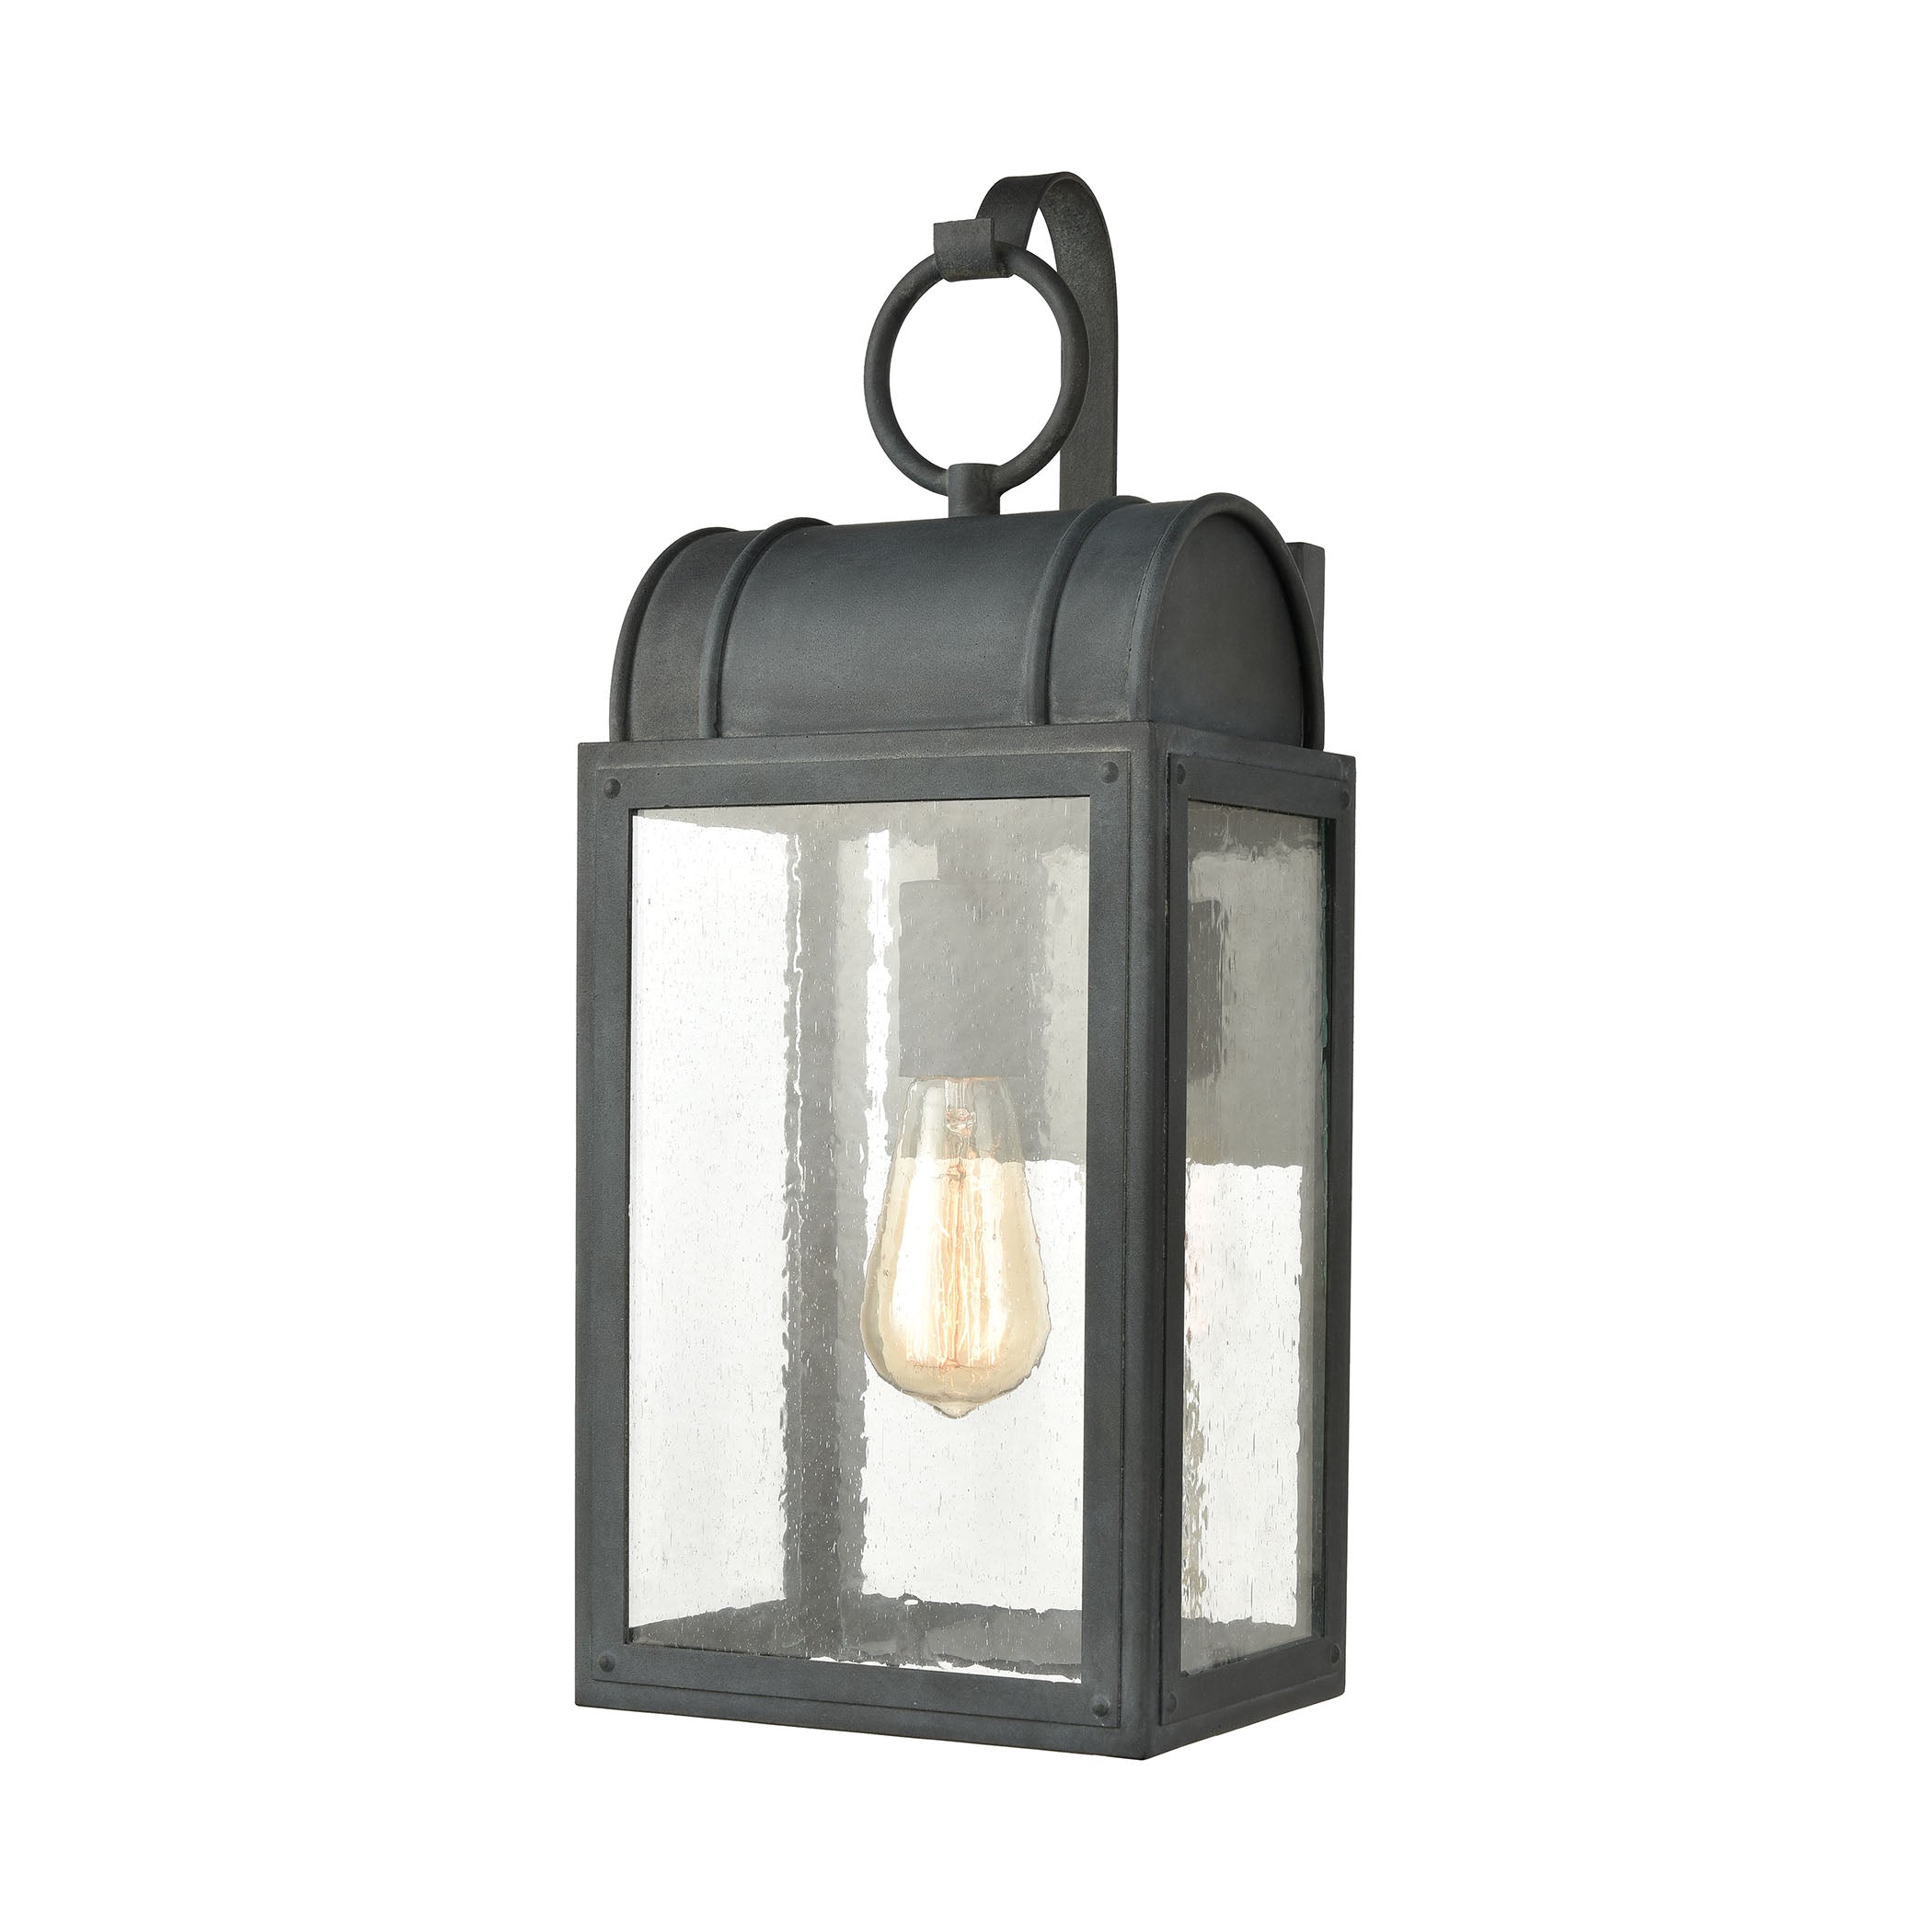 ELK Lighting 45482/1 Heritage Hills 1-Light Outdoor Sconce in Aged Zinc with Seedy Glass Enclosure